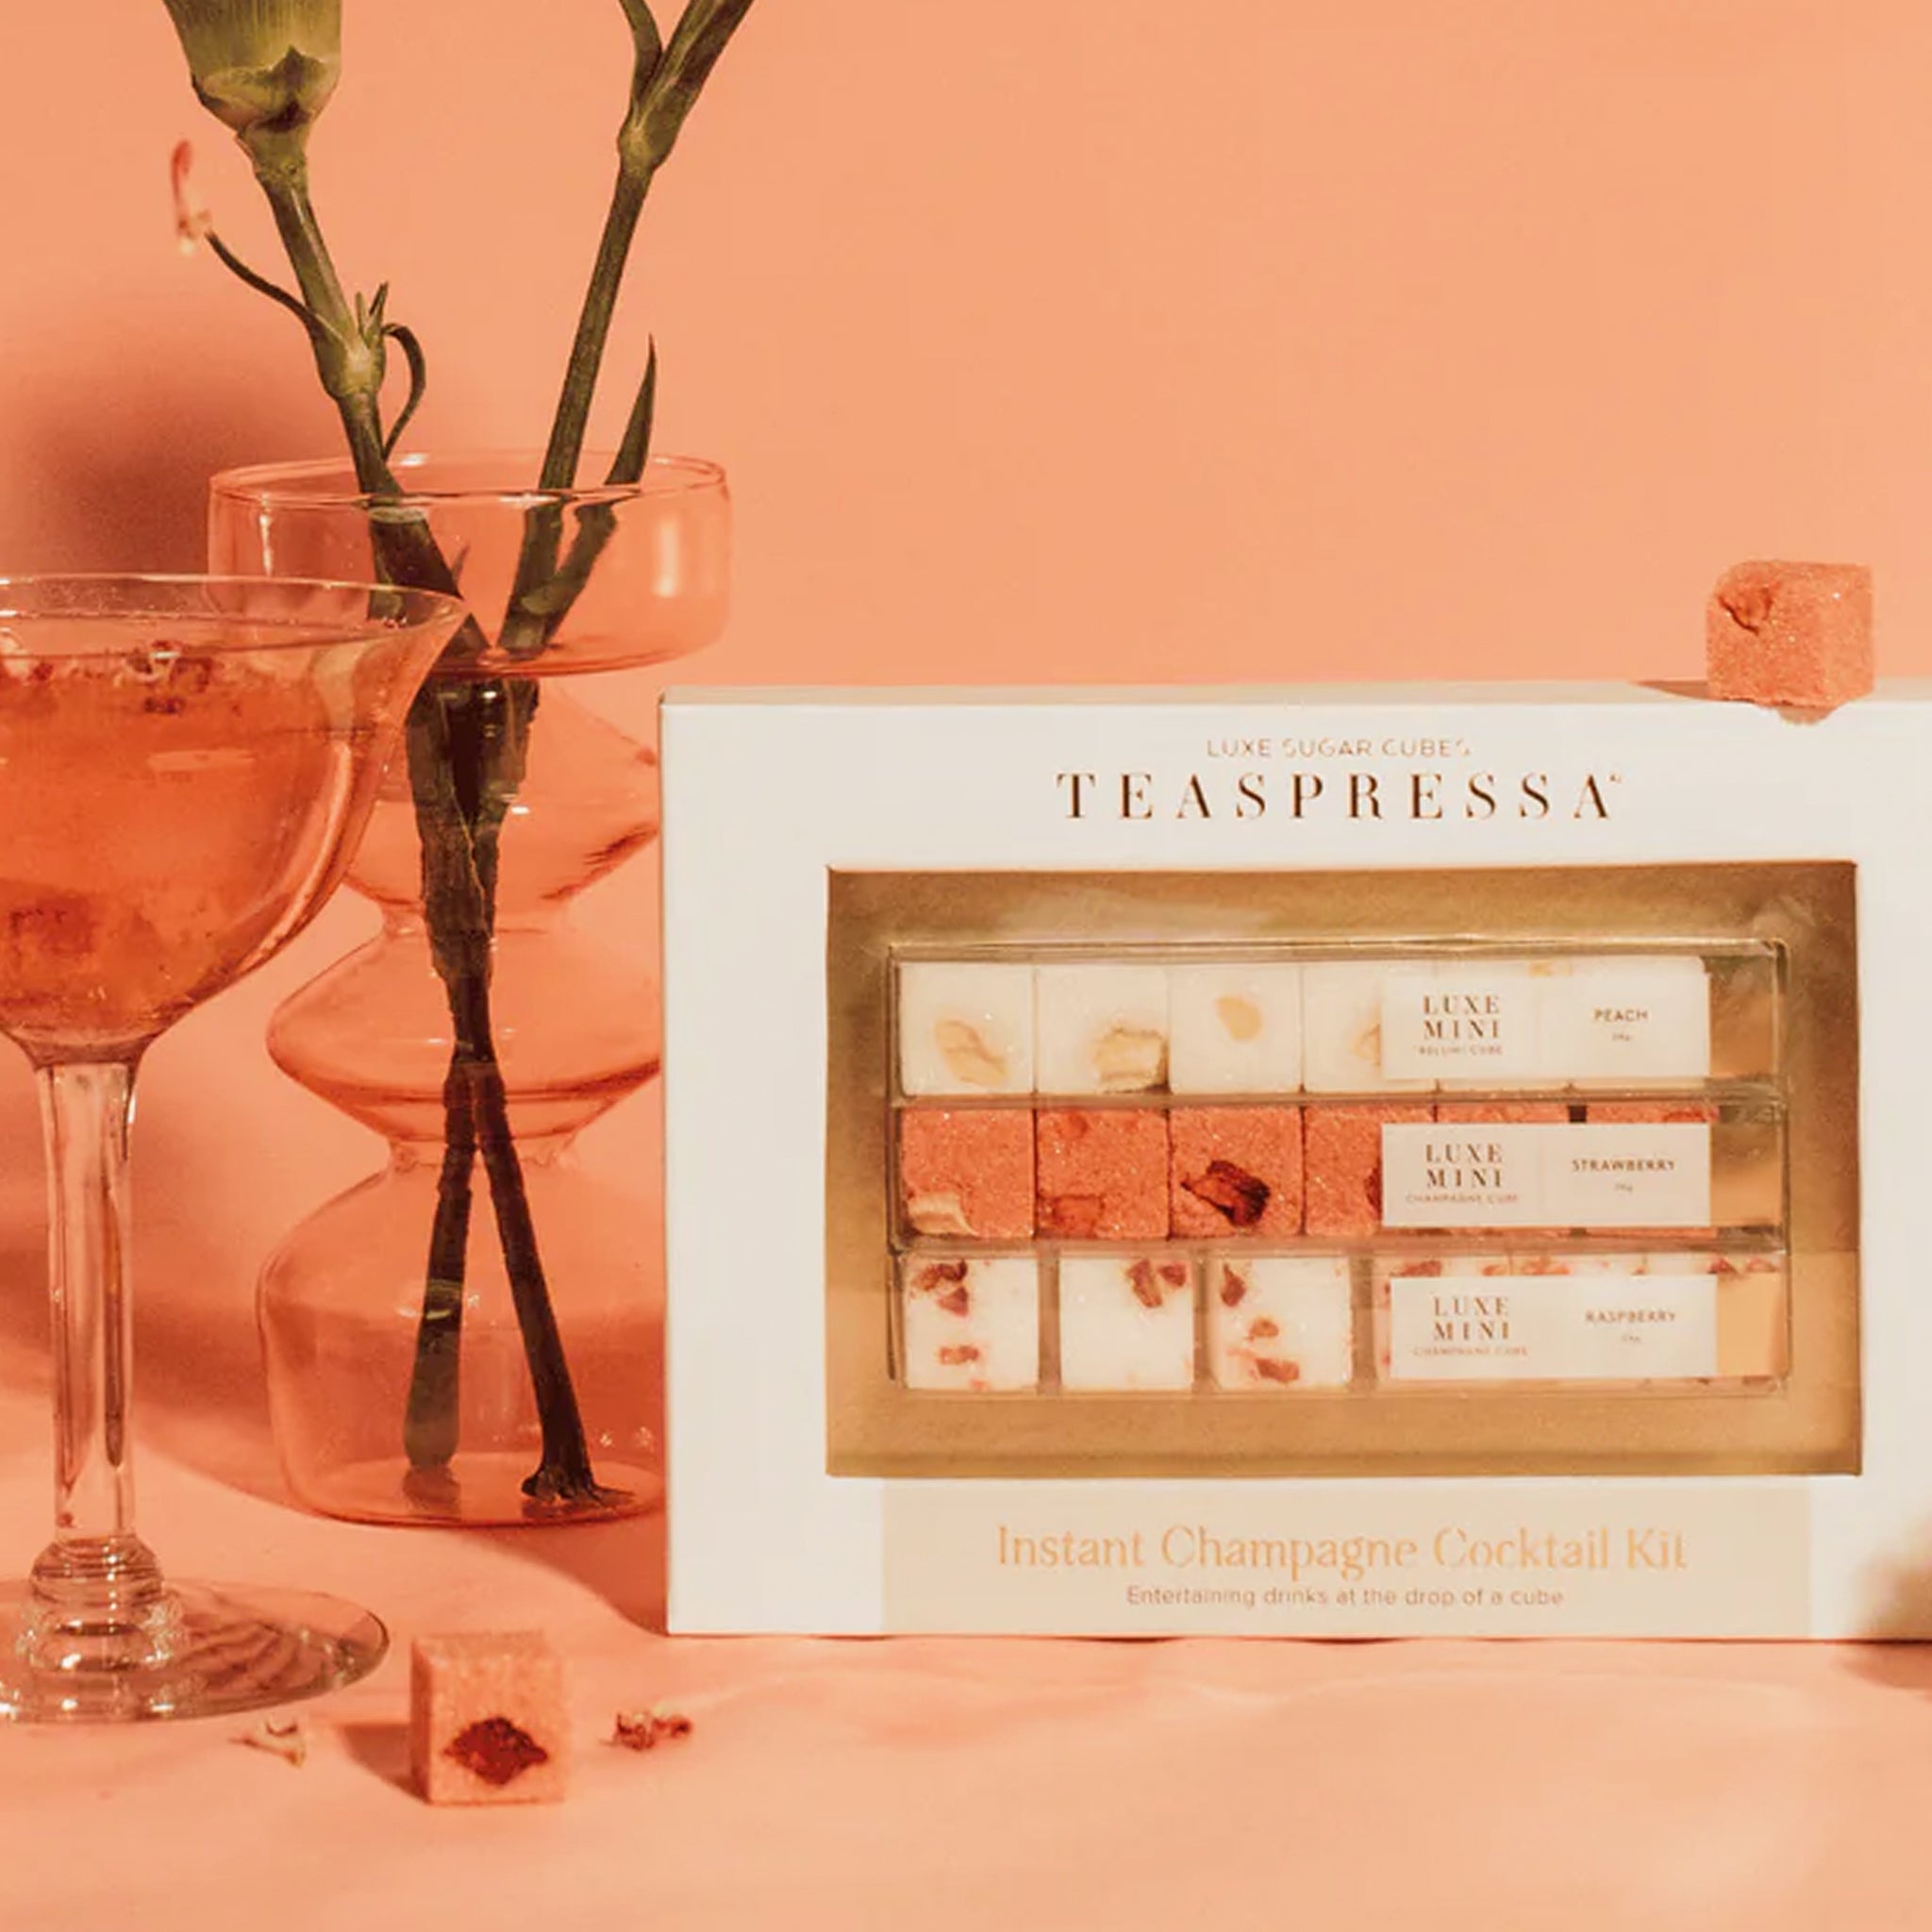 On a pink background is a sugar cube cocktail kit that reads, "Teaspressa Instant Champagne Cocktail Kit" with a set of three sugar cube strips that come in three flavors.